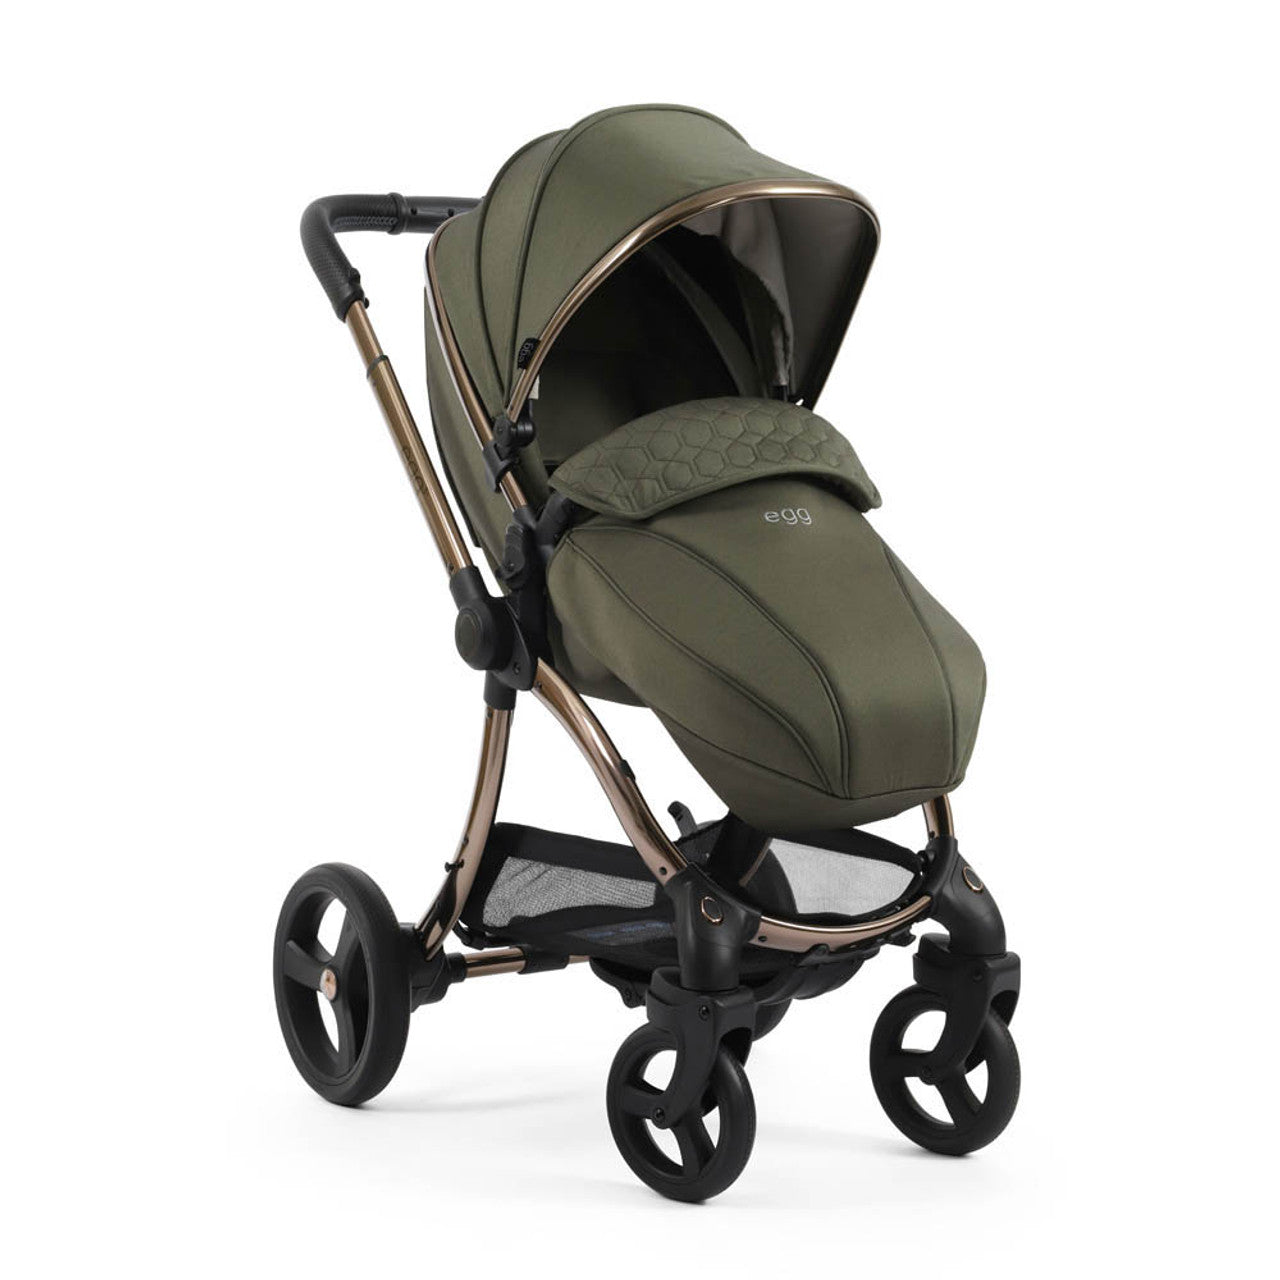 Egg® 3 Pushchair + Carrycot 2 in 1 Pram - Hunter Green -  | For Your Little One